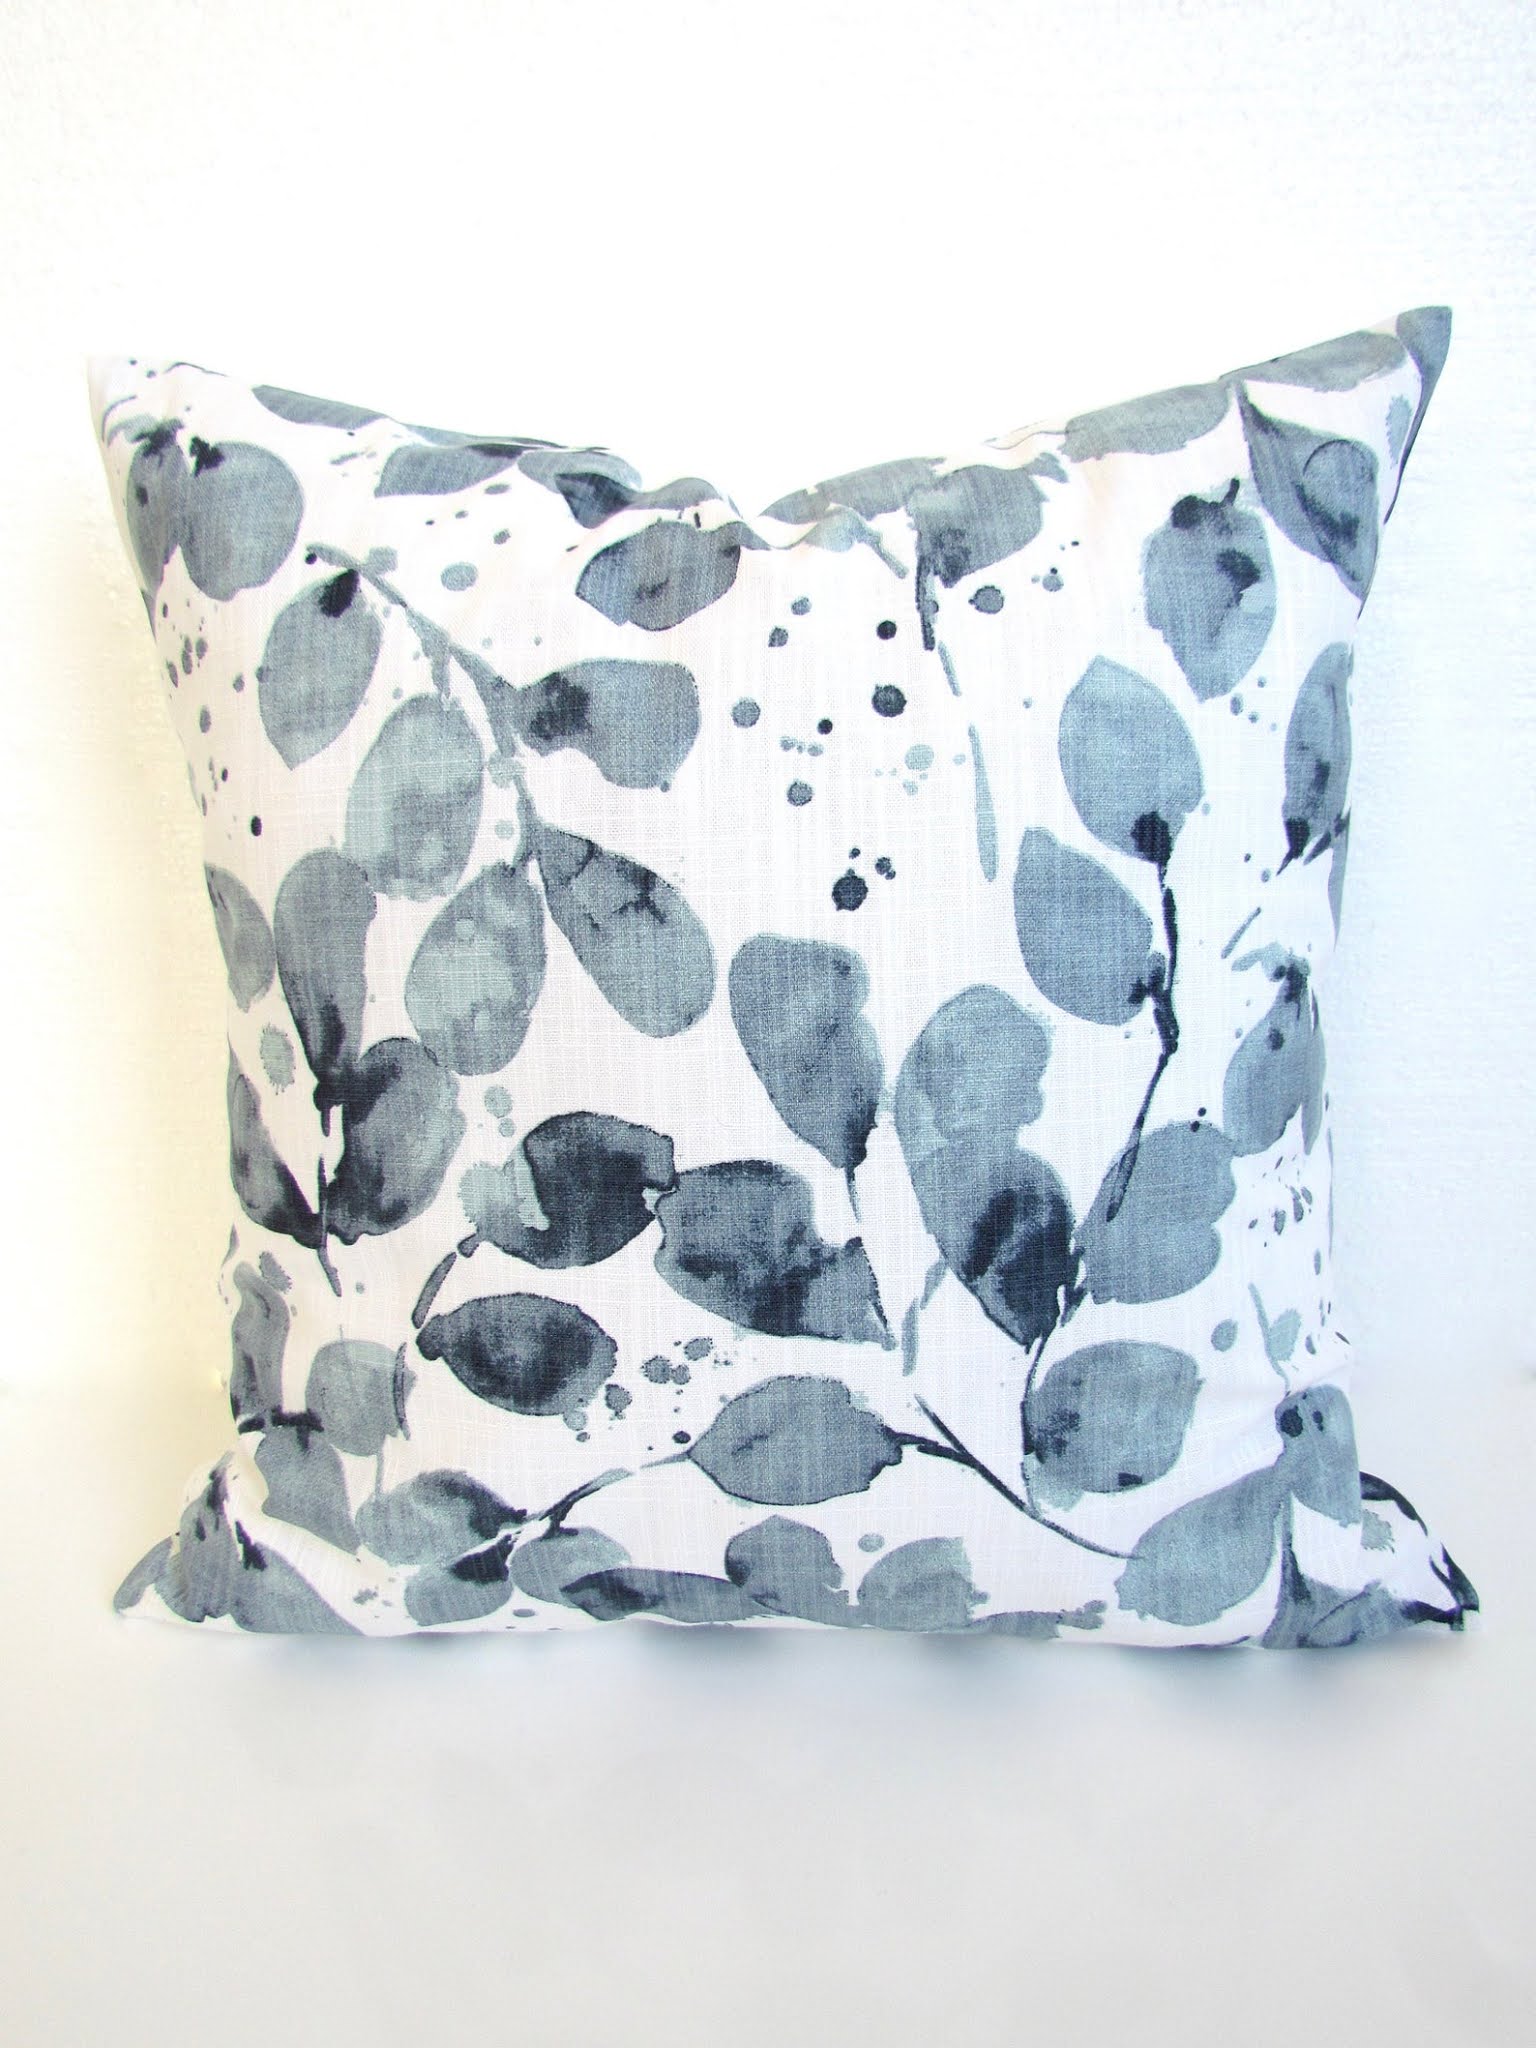 Where to Buy Throw Pillows for Under $20, Thrifty Decor Chick